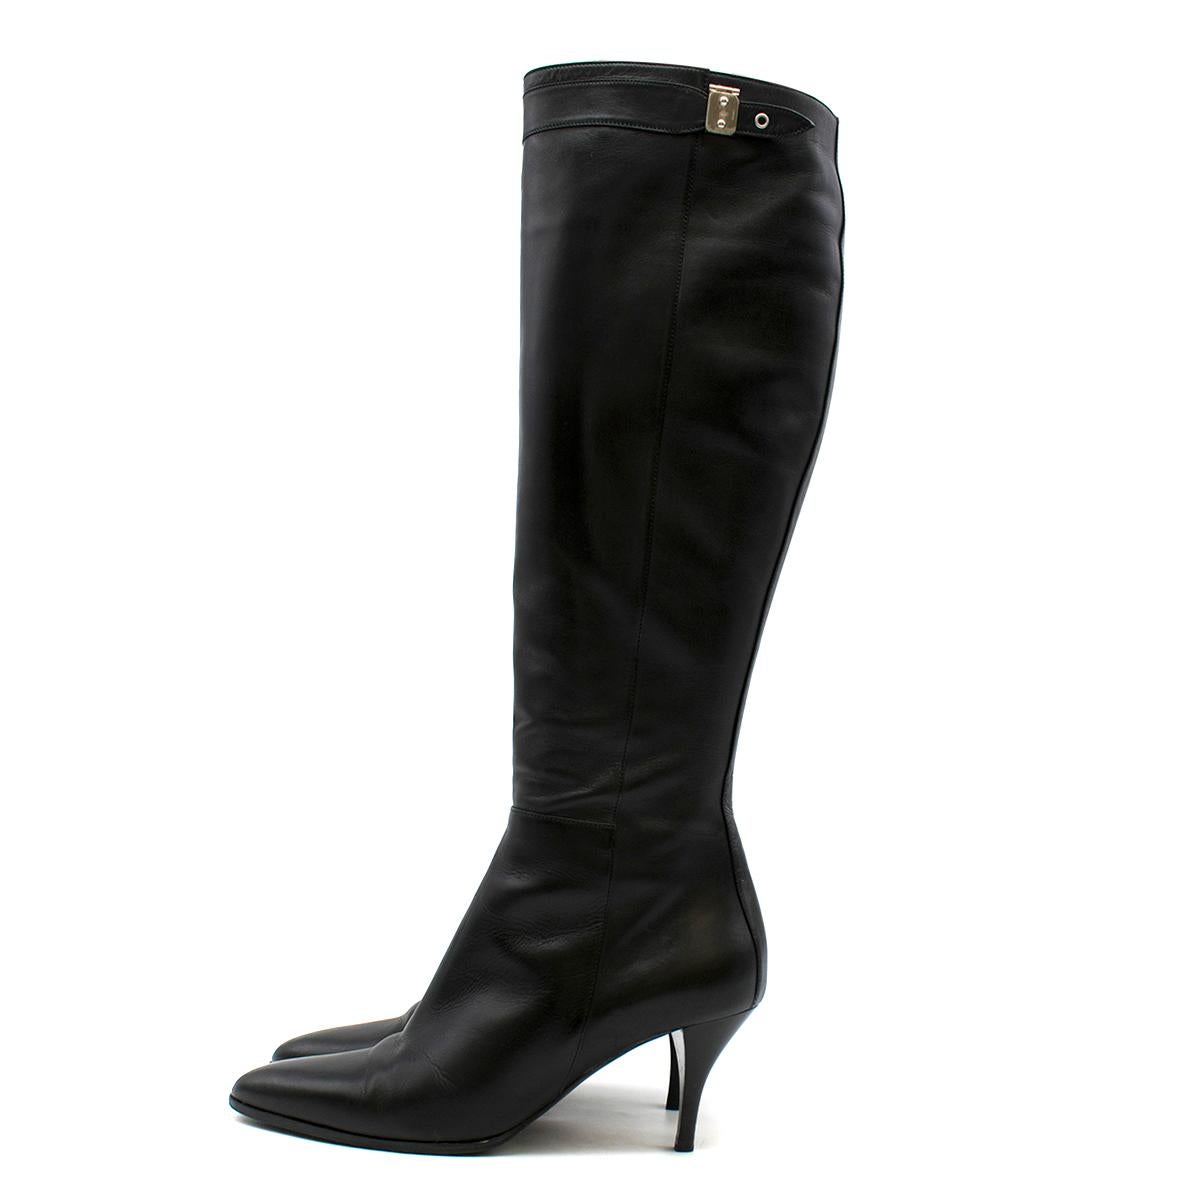 Women's Hermes Black Leather Point-toe Heeled Long Boots 37 (IT)